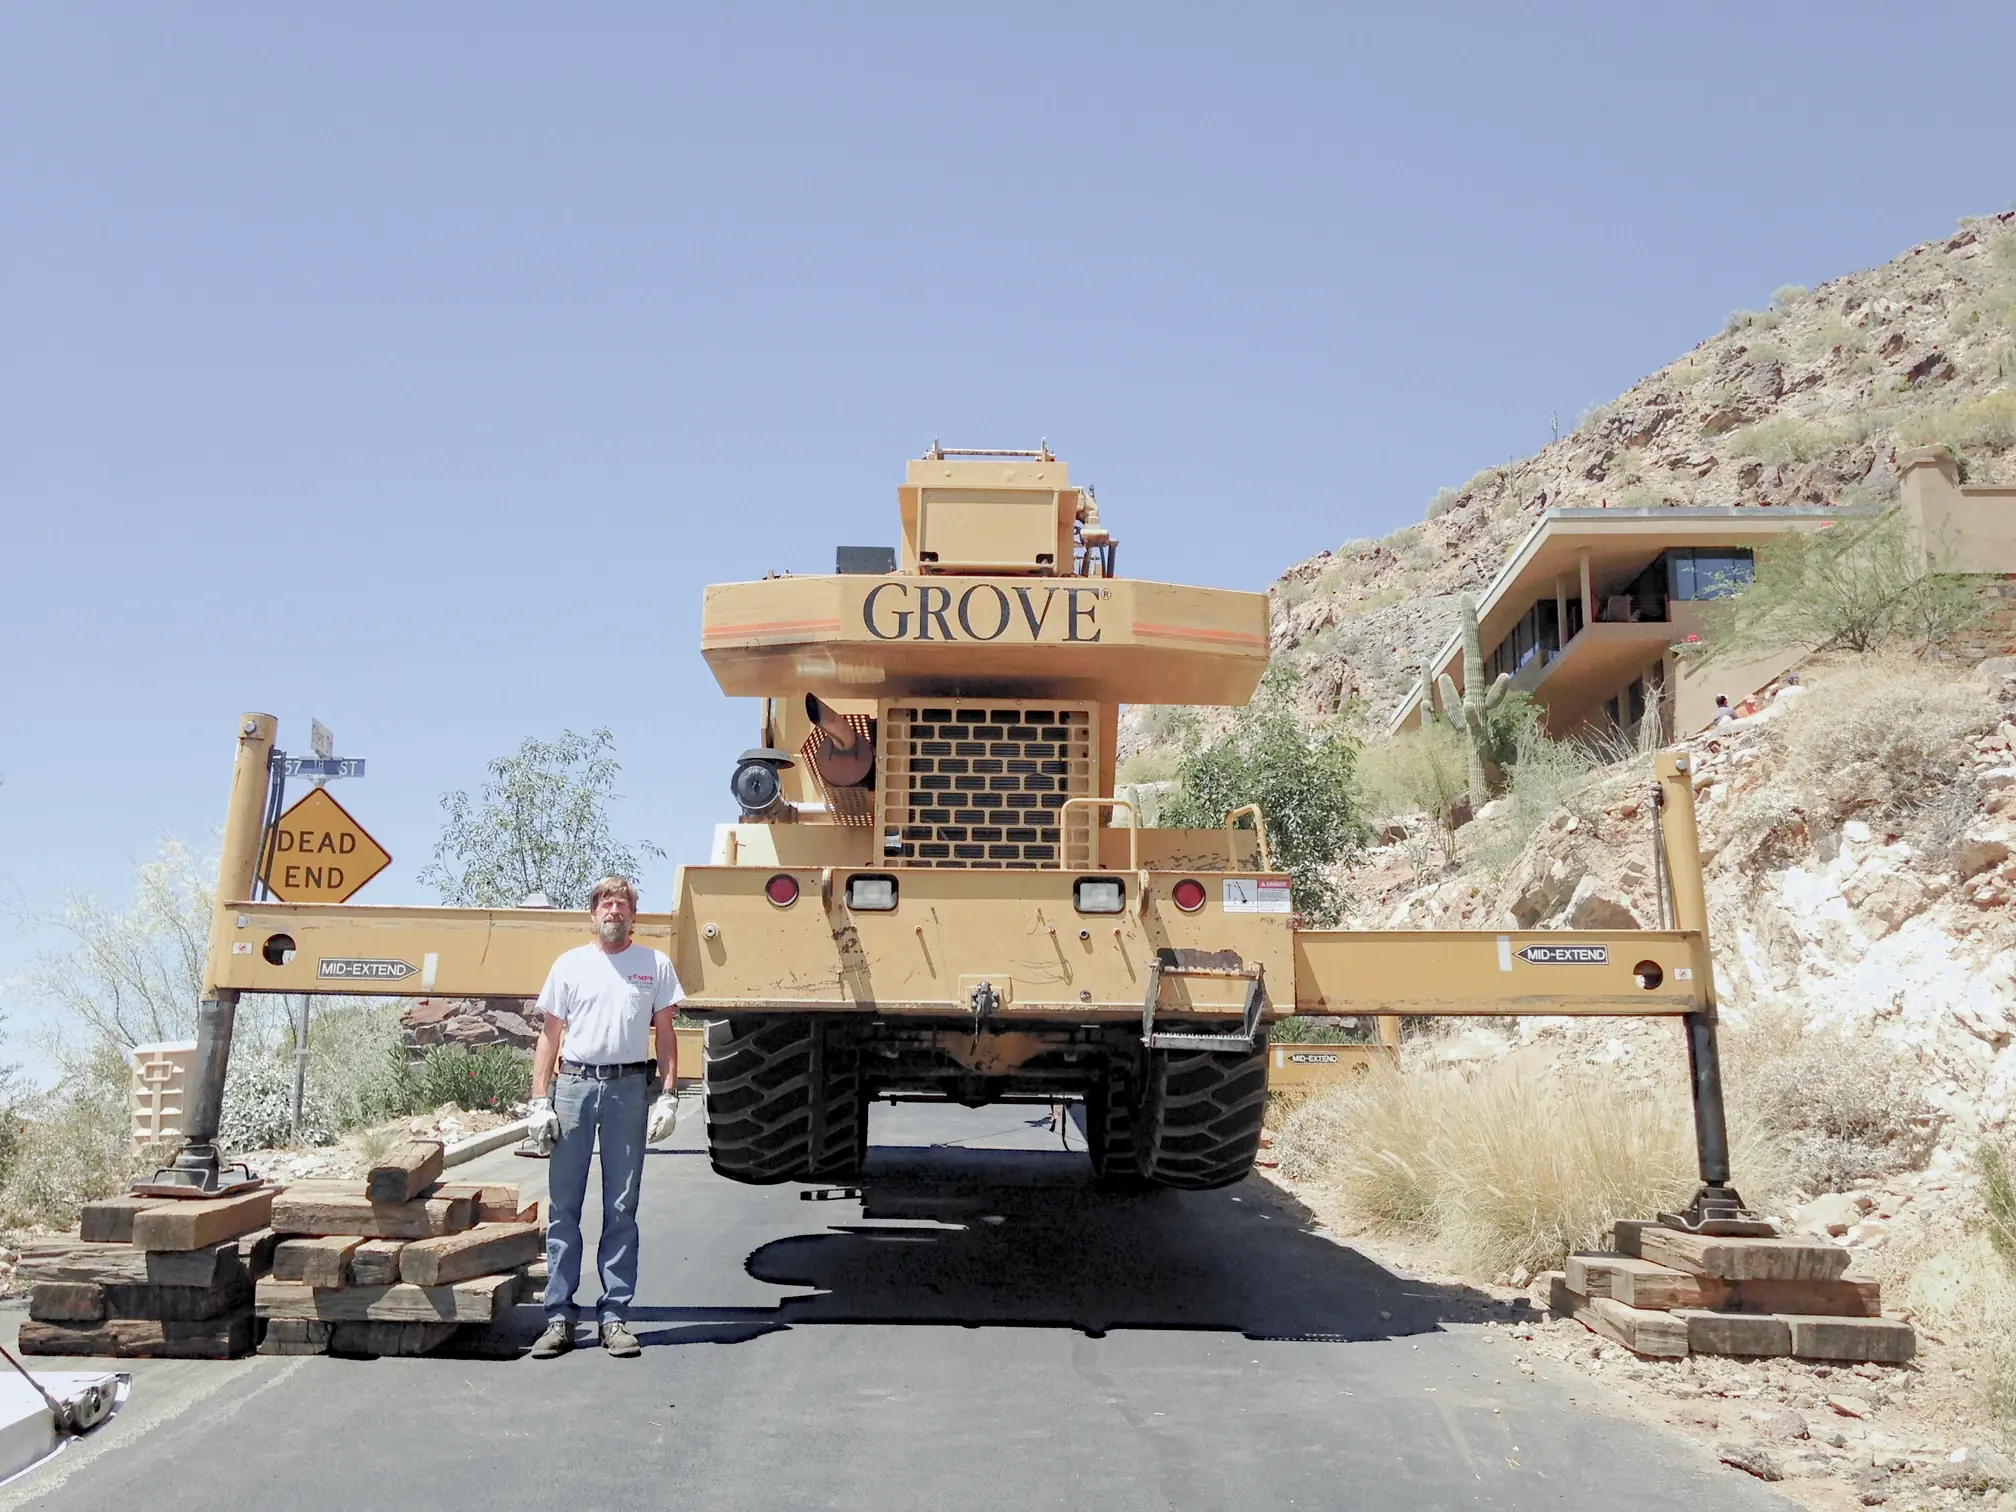 A worker stands behind a large 'rough terrain' crane set on blocks, highlighting its adaptability in challenging environments.